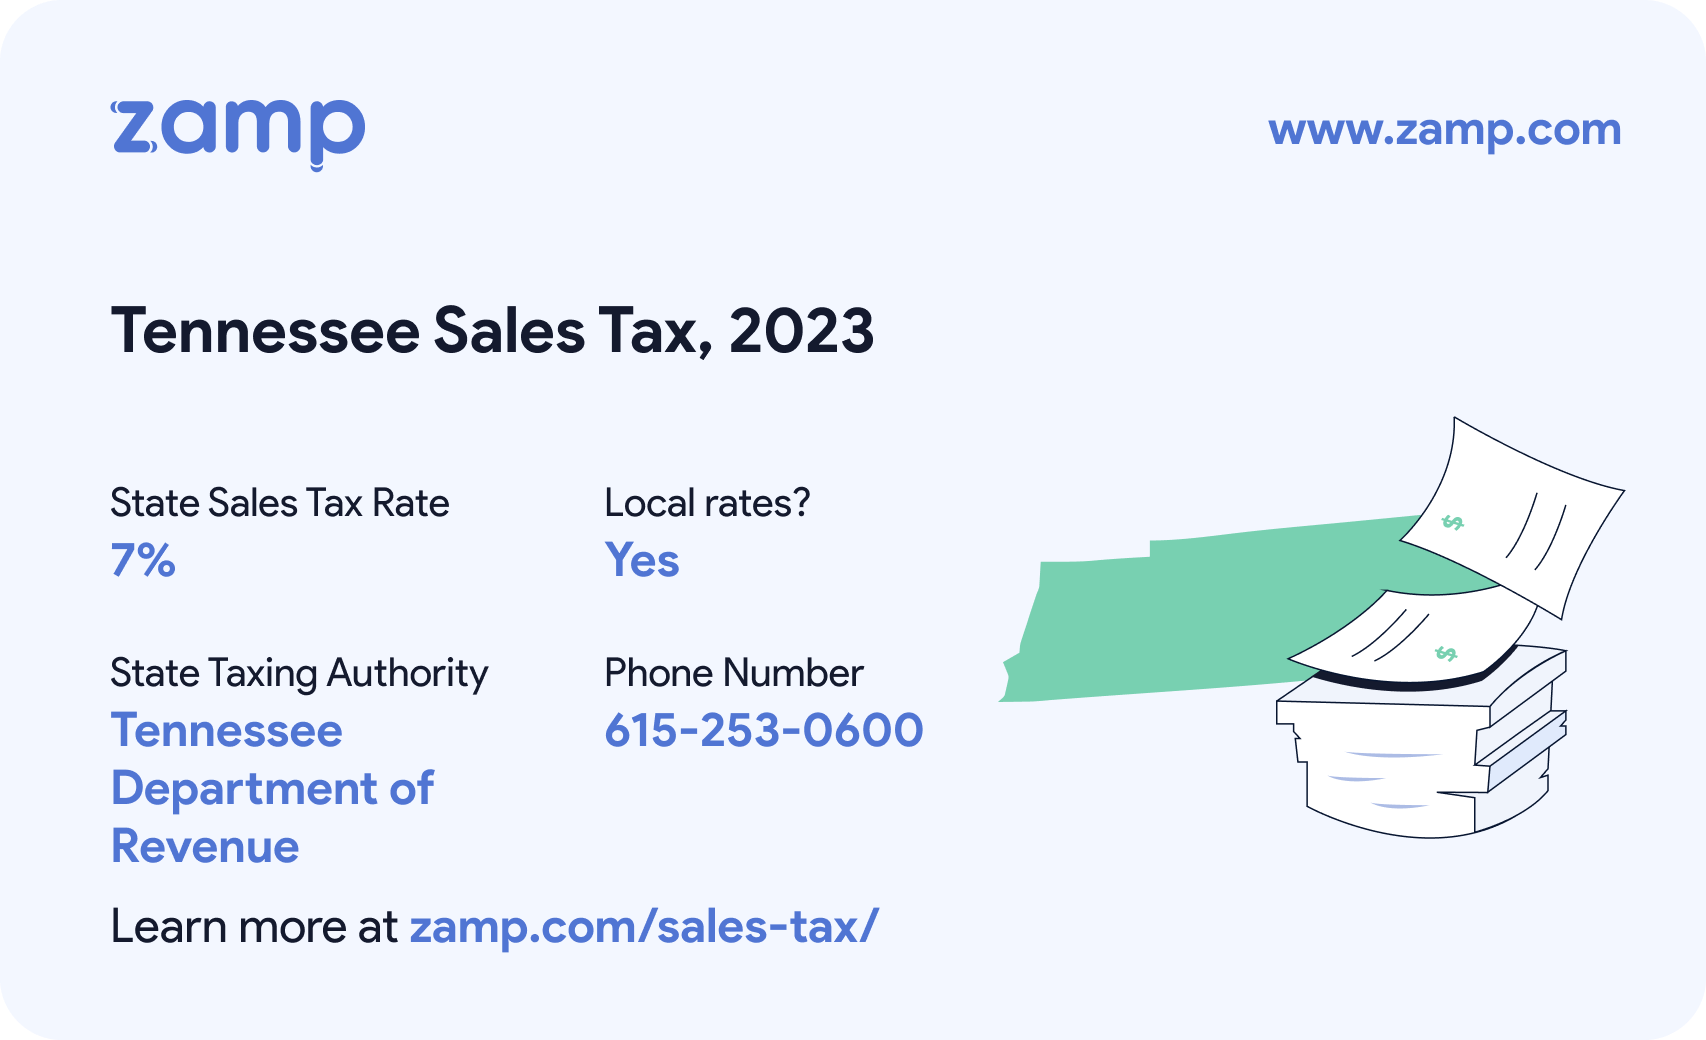 Tennessee basic sales tax info for 2023 - State sales tax rate: 7%, Local rates? Yes; Tennessee Department of Revenue; and phone number 615-253-0600